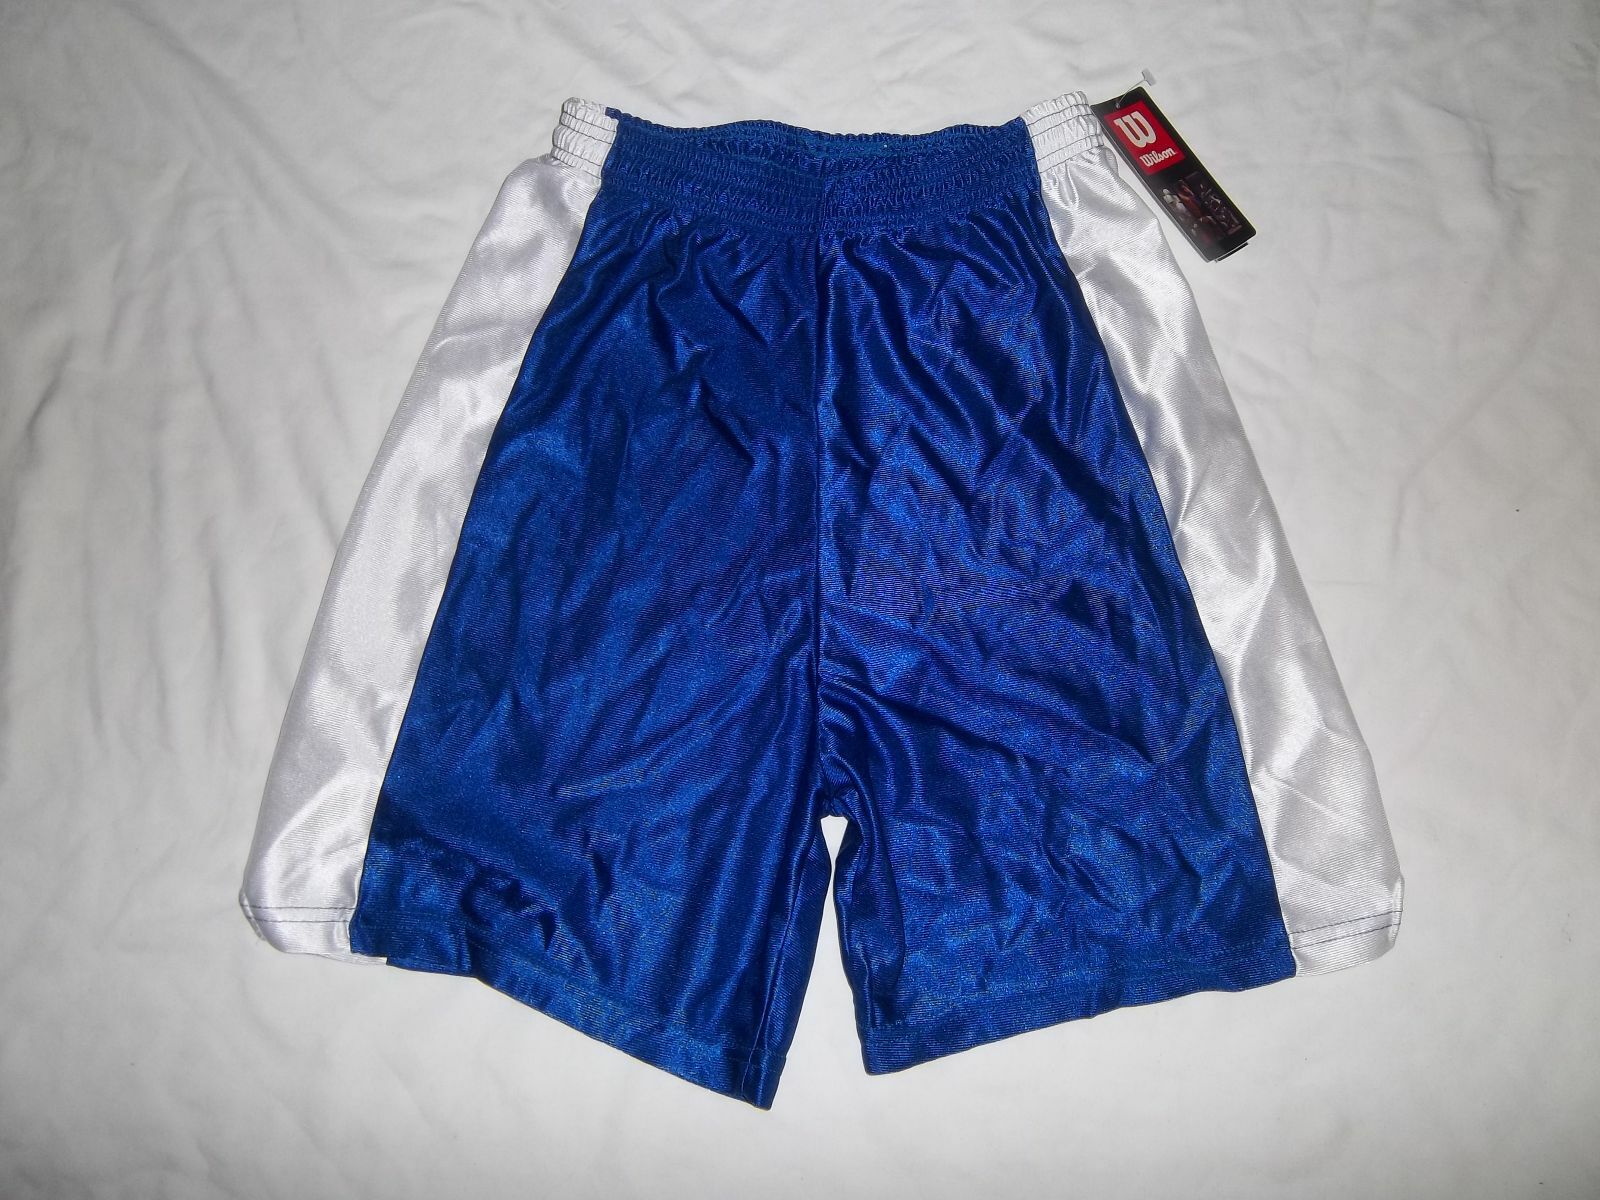 WILSON B2345  BASKETBALL  SHORTS - VARIOUS COLORS AND SIZES